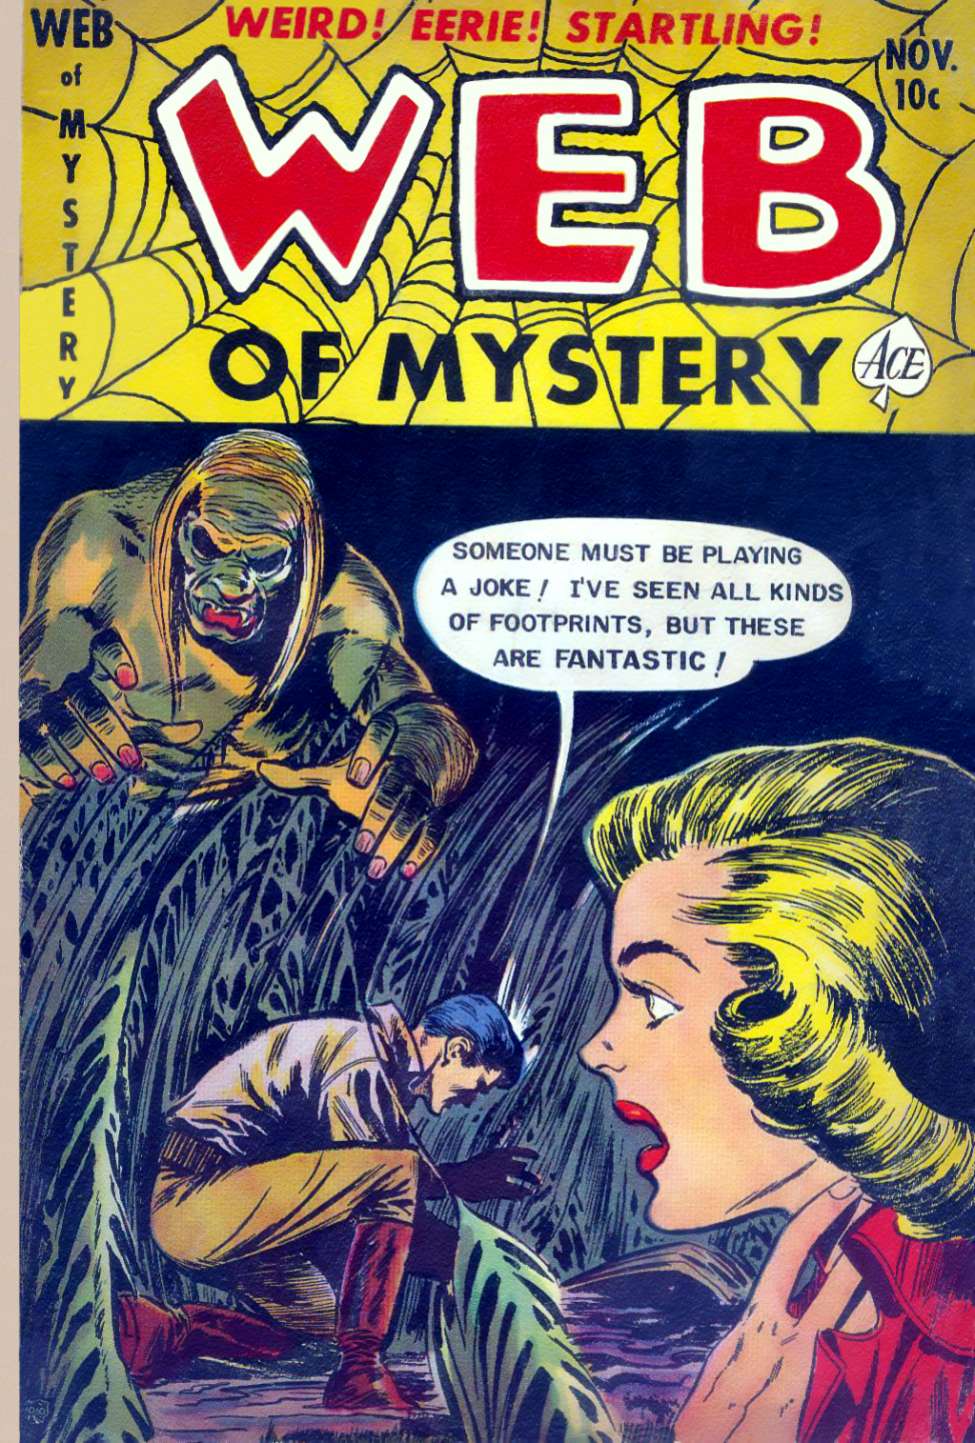 Comic Book Cover For Web of Mystery 15